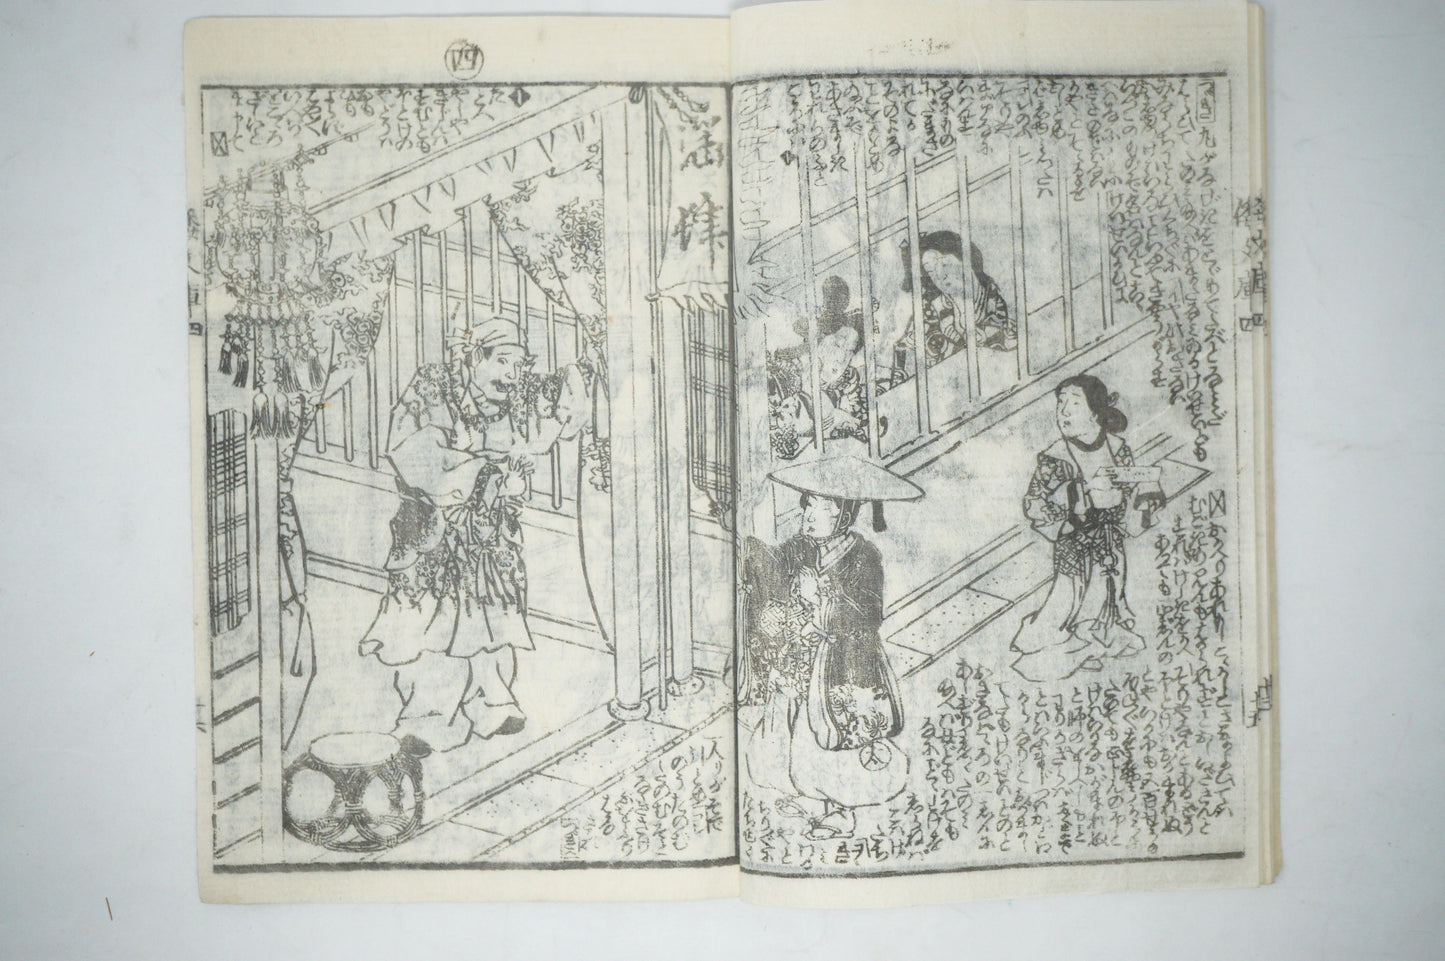 Antique Japanese Manga Book with detailed Woodblock Printed Images from Japan 0928D13